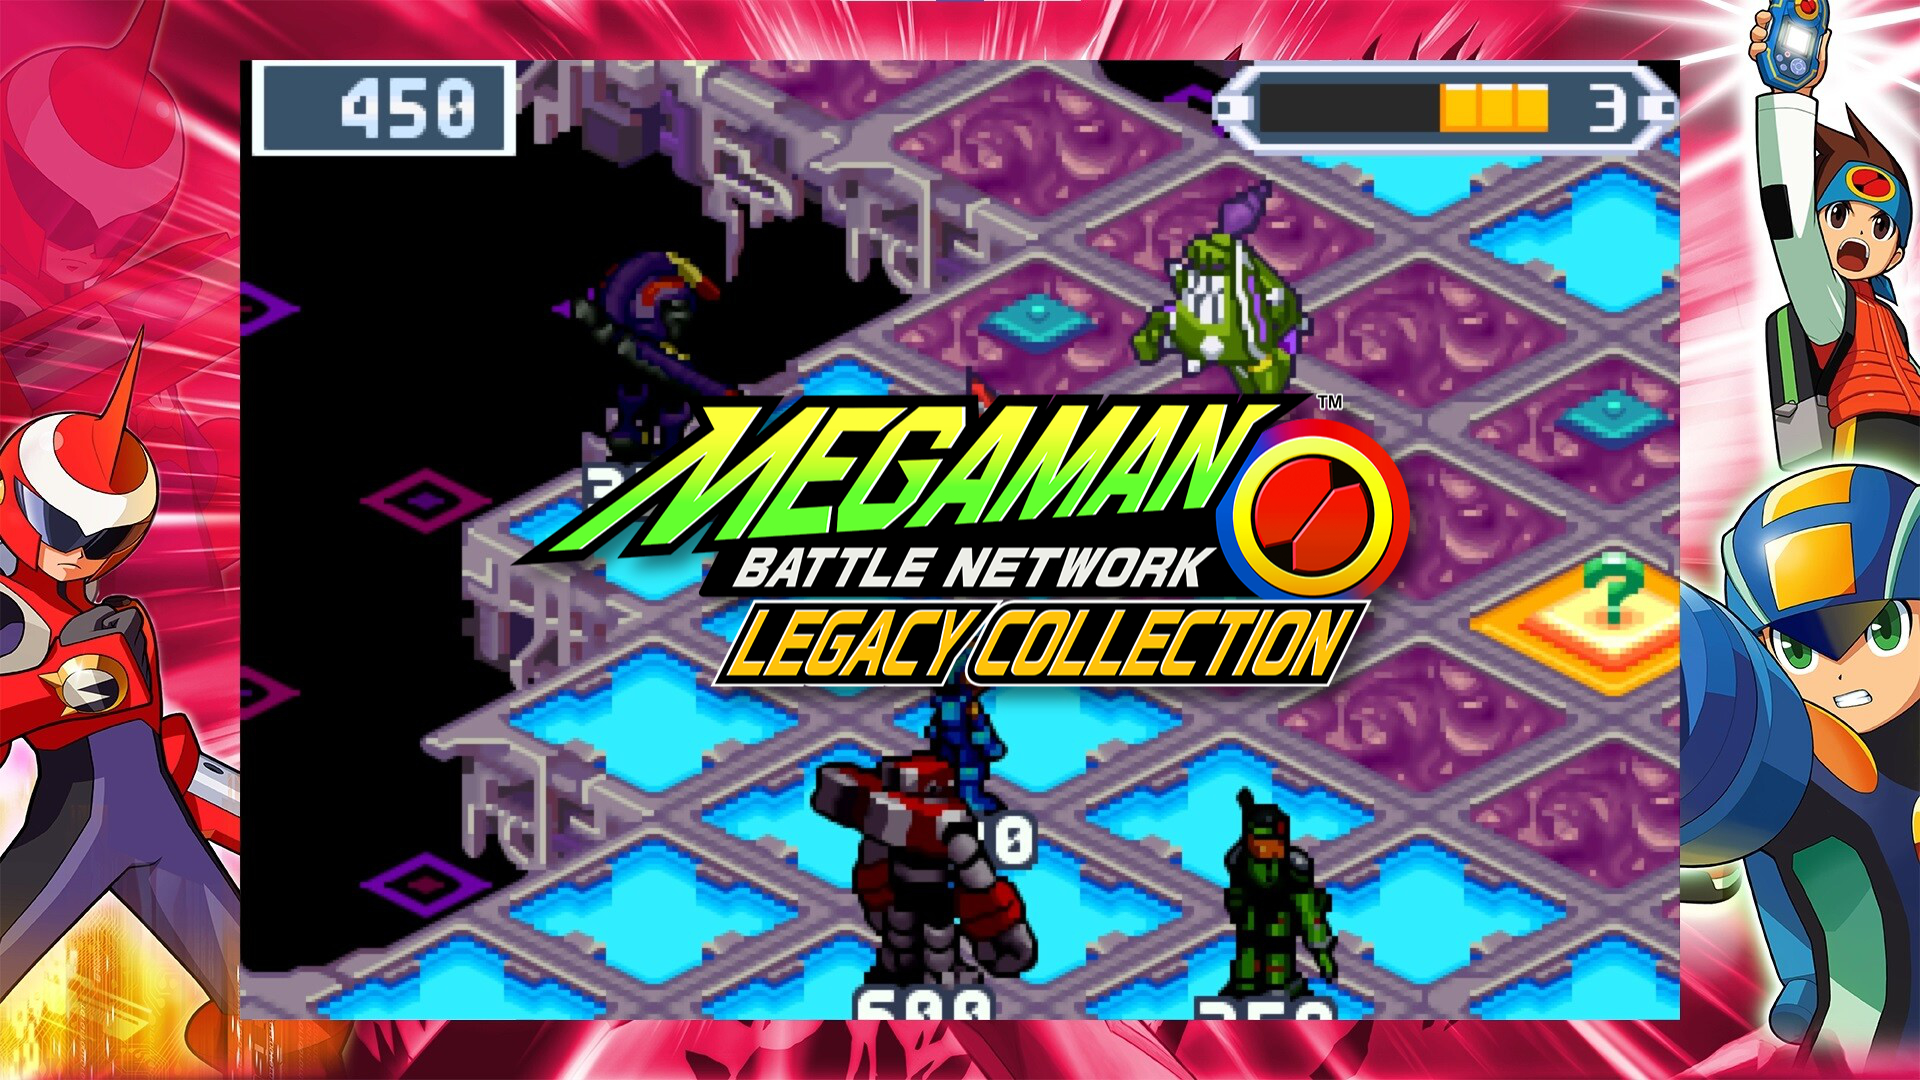 Mega Man Battle Network Legacy Collection coming in 2023